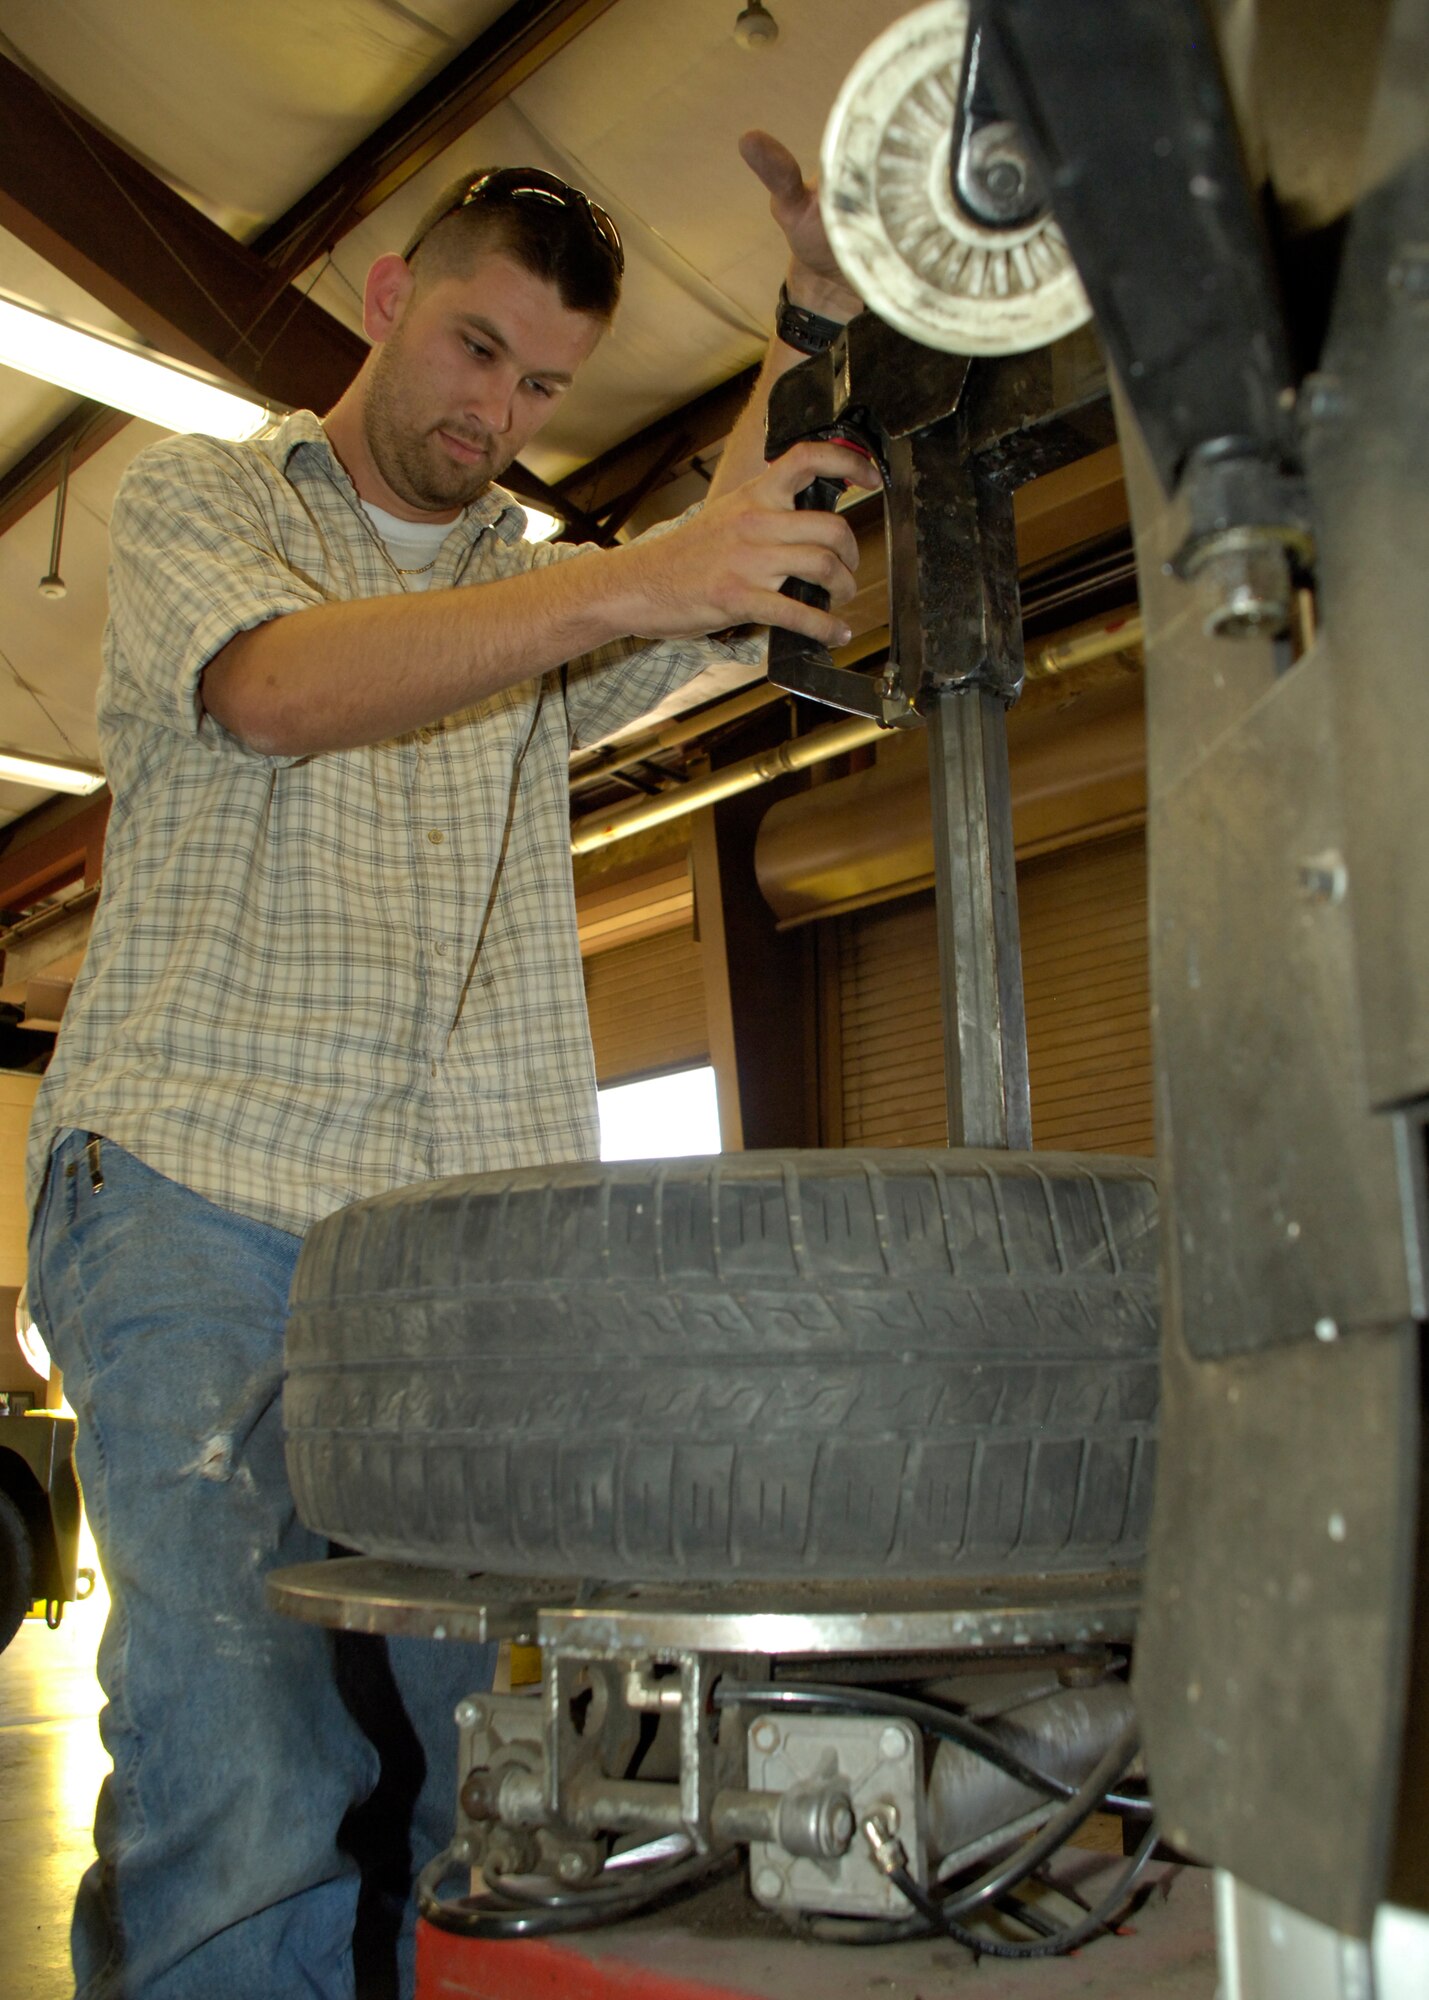 Mr. Jason Watson, tool and parts attendant, uses a tire machine to mount a tire at the Auto Hobby Center on Holloman Air Force Base, N.M., May 22. The center is staffed for your assistance and guidance if needed. (U.S. Air Force photo/Airman 1st Class Michael Means)